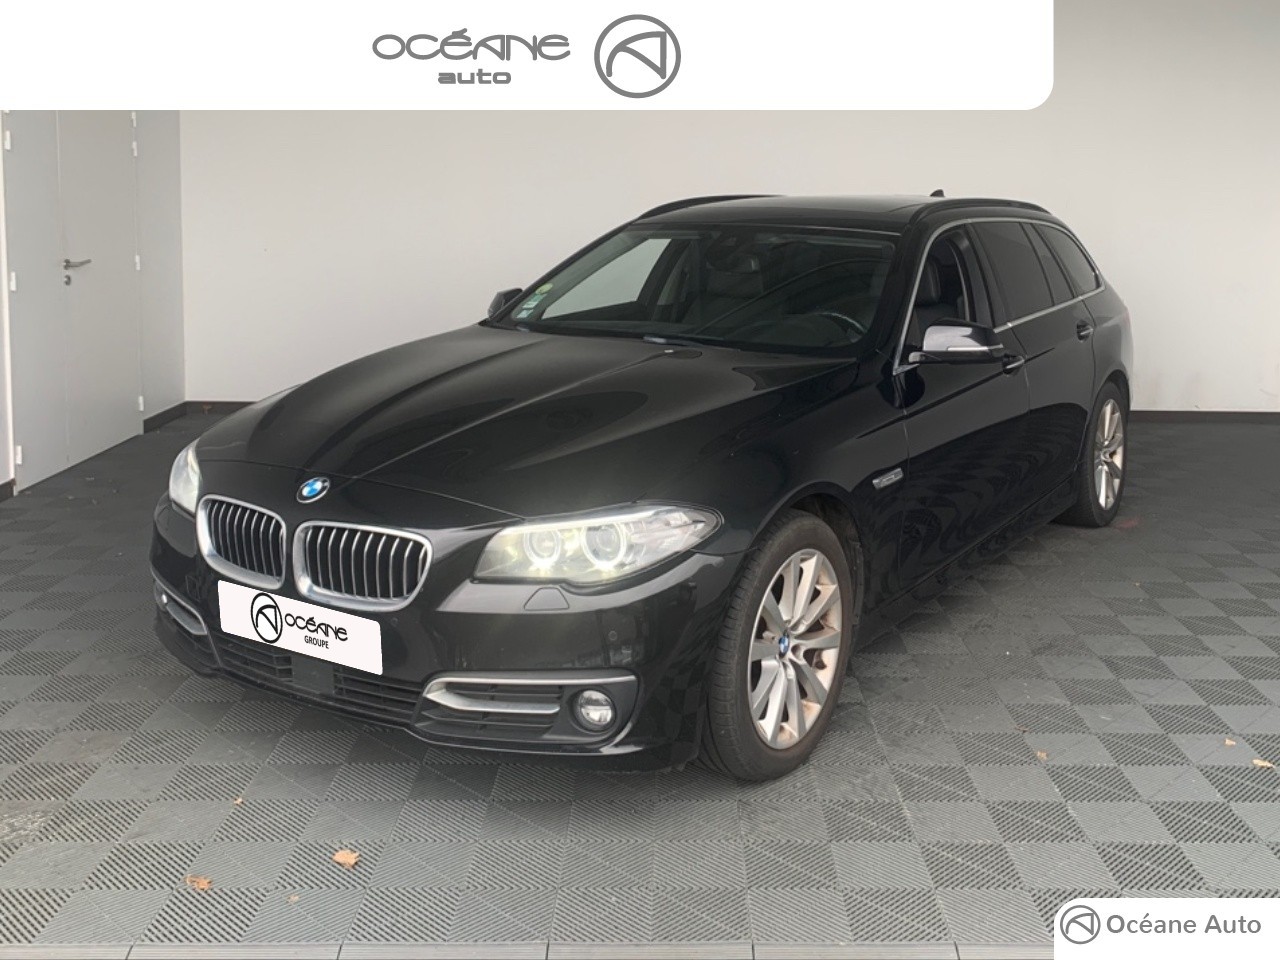 BMW SERIE 5 TOURING F11 LCI Touring 525d 218 ch - Véhicule Occasion Océane Auto